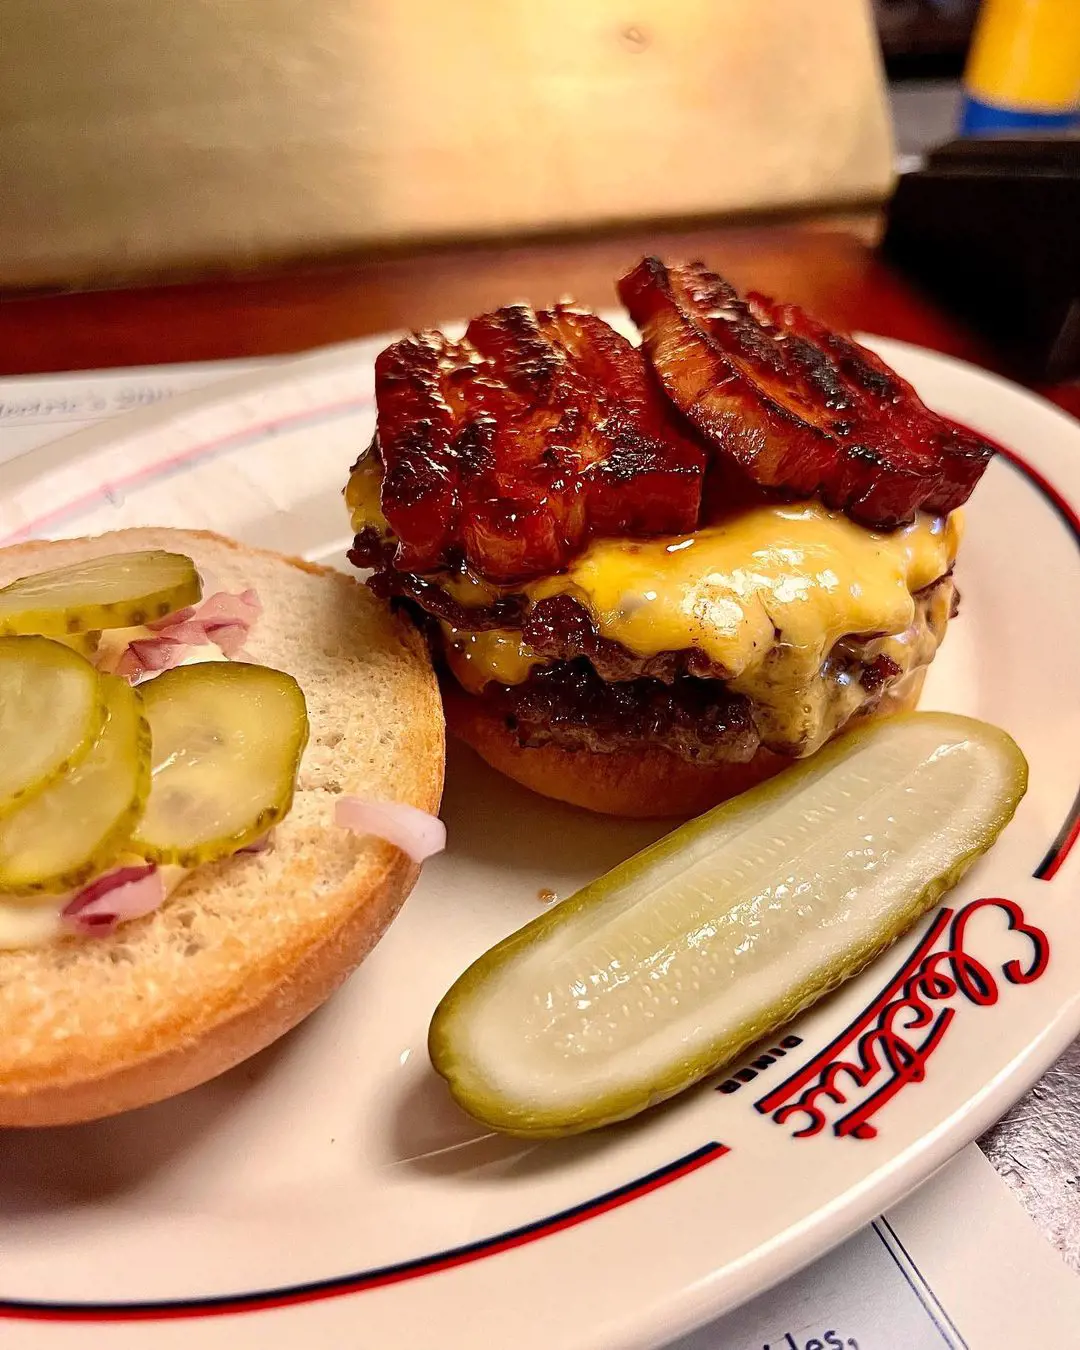 double cheese burger with the diner’s signature thick cut bacon